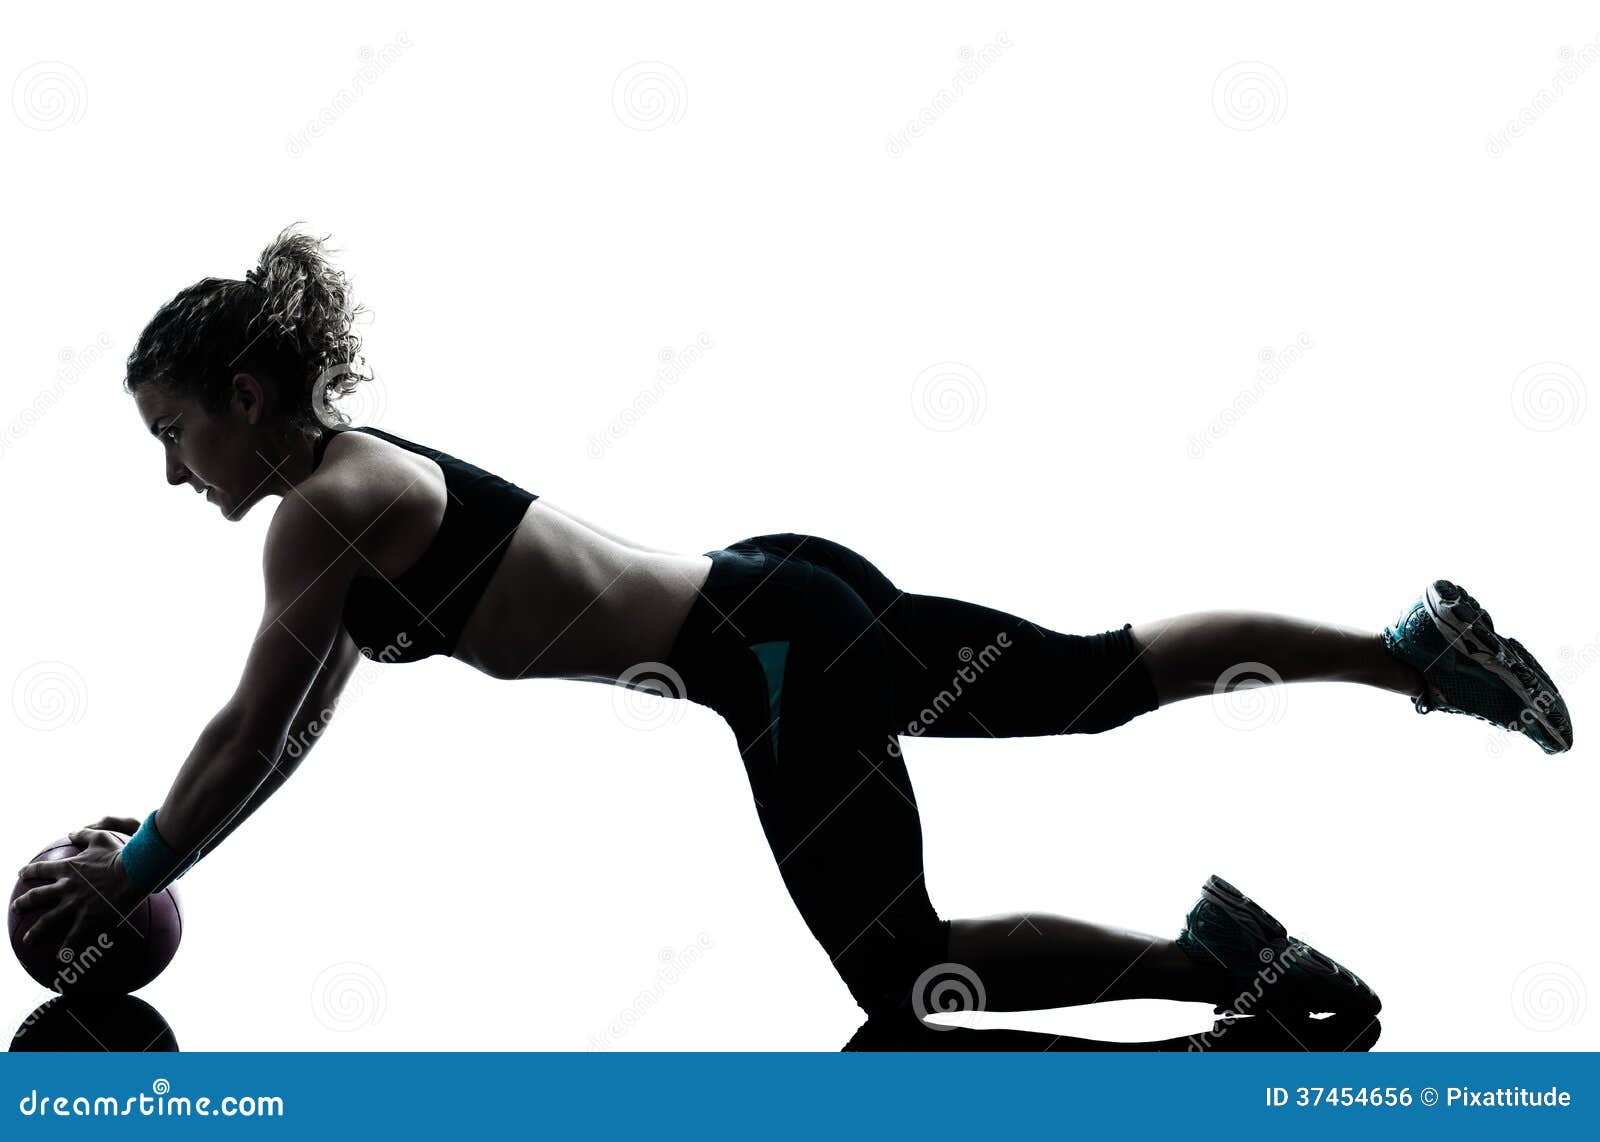 Woman Exercising Fitness Ball Workout Silhouette Stock Photo - Image of profiles, ball: 47246506